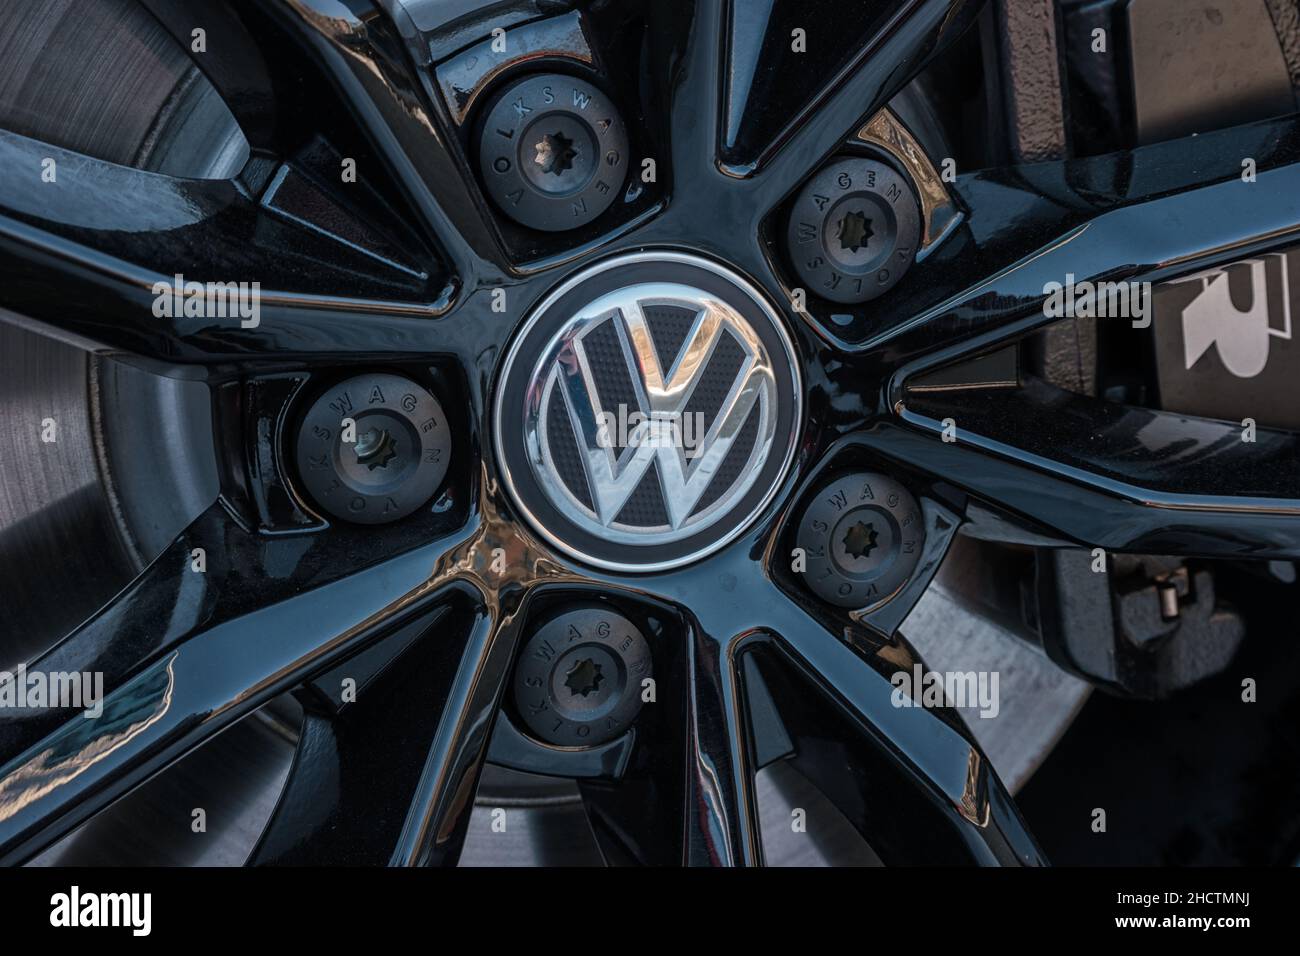 Sign of a Volkswagen logo on a car rim.. Volkswagen is the biggest German automaker and the third largest automaker in the world. Stock Photo